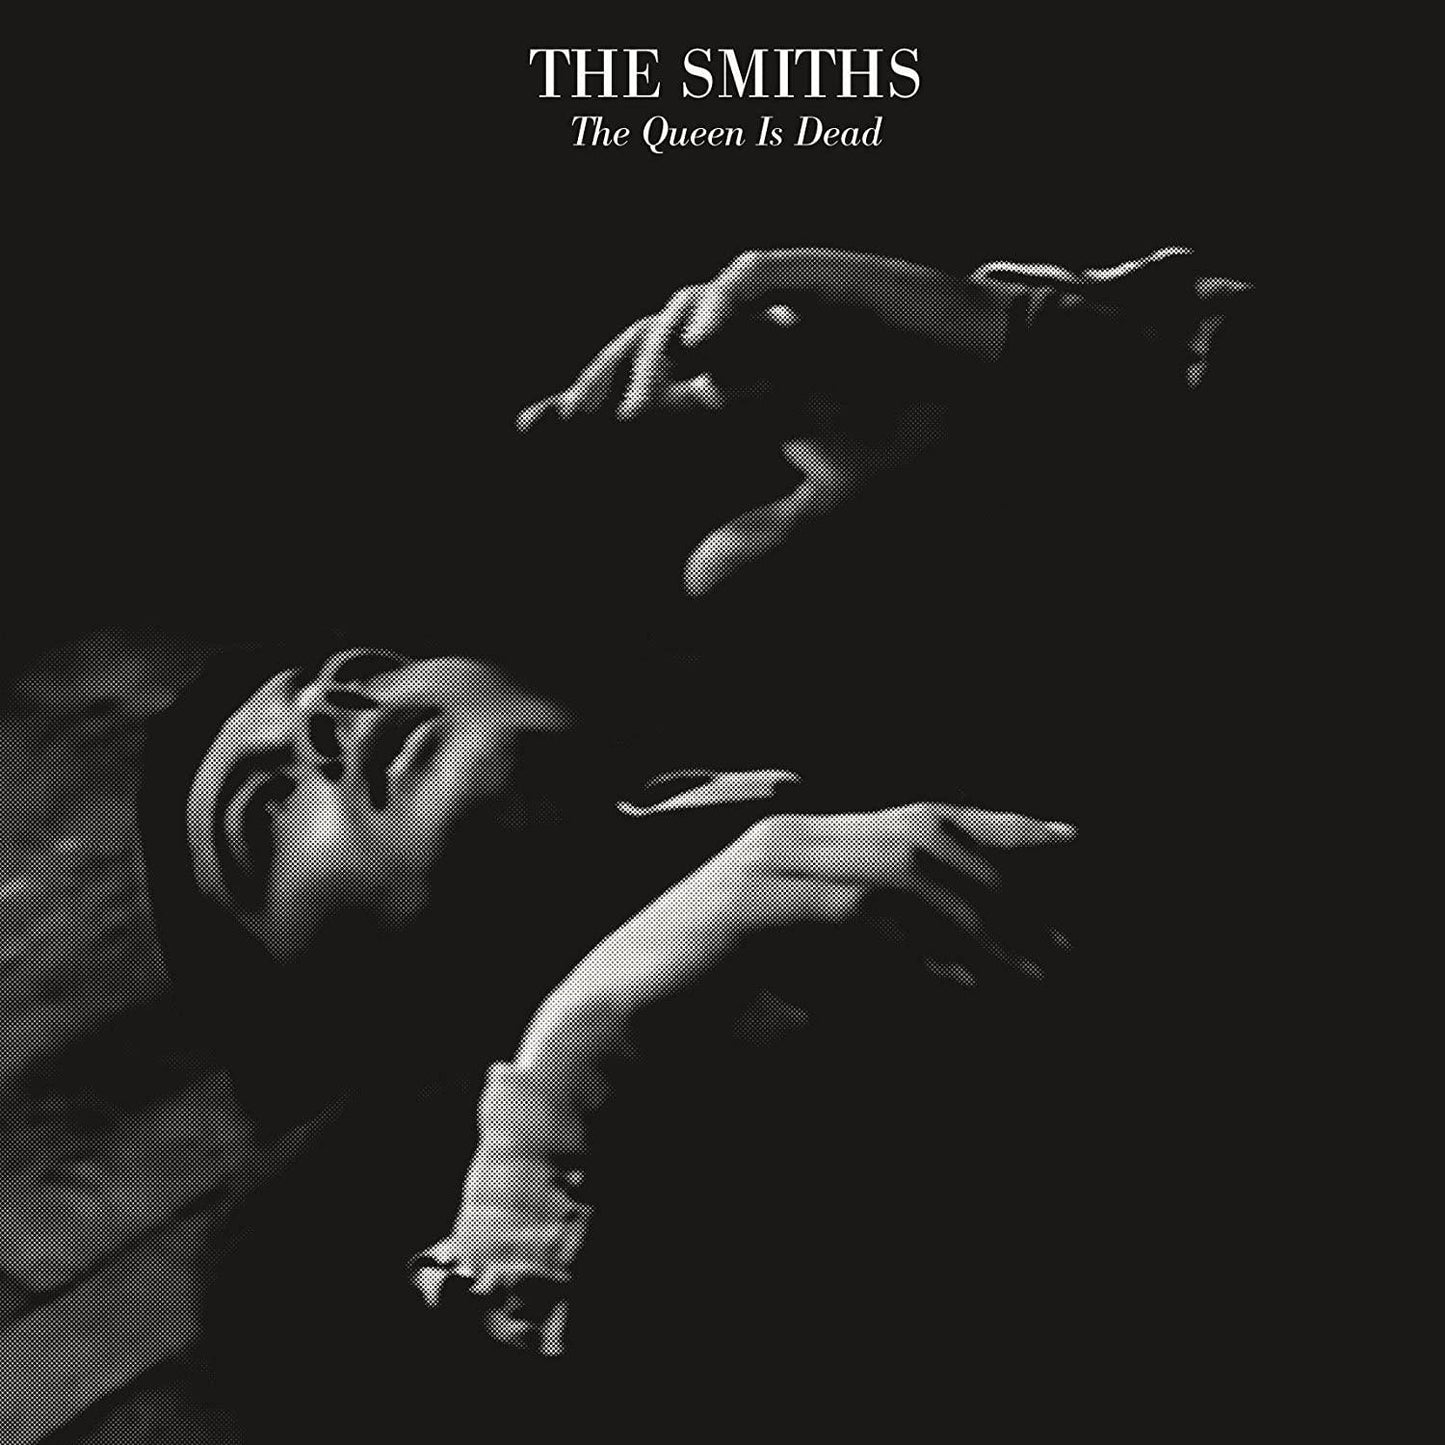 The Smiths - "The Queen Is Dead" Deluxe Edition Box Set